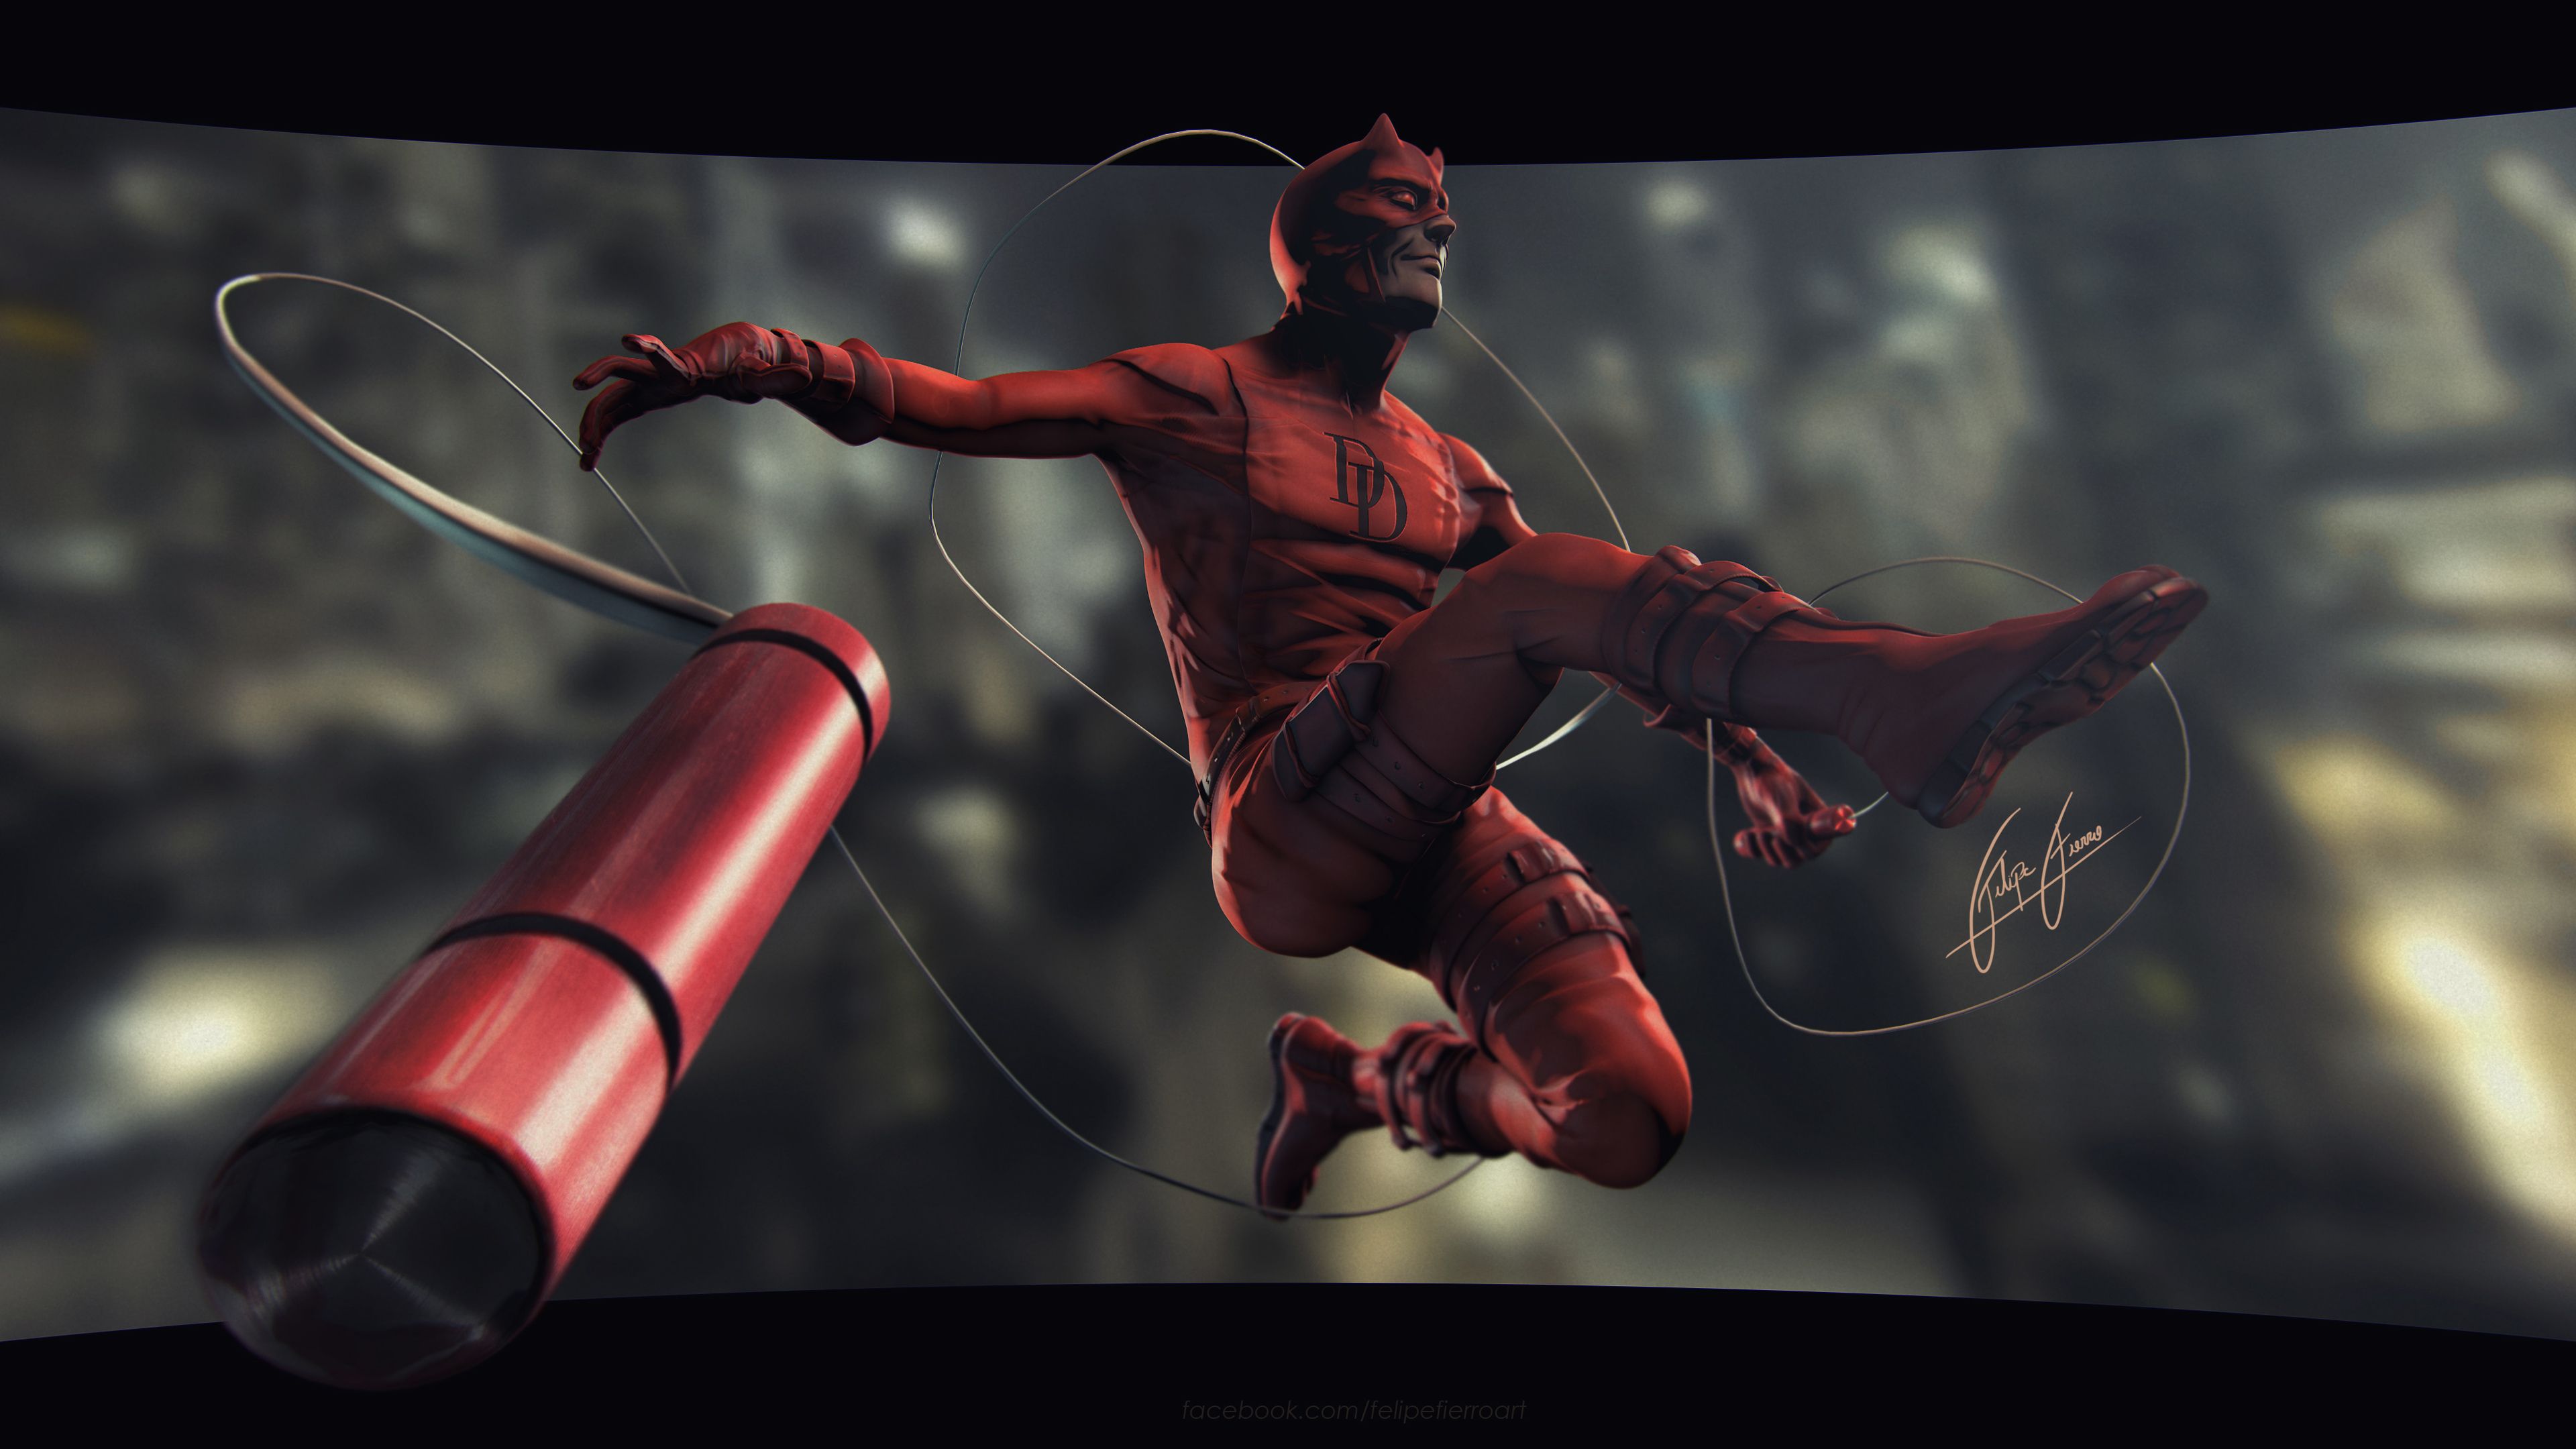 Daredevil The Man Without Fear 4k Superheroes Wallpaper, Hd Wallpaper, Wallpaper, Daredev. Superhero, Hero Wallpaper, IPhone Wallpaper Inspirational